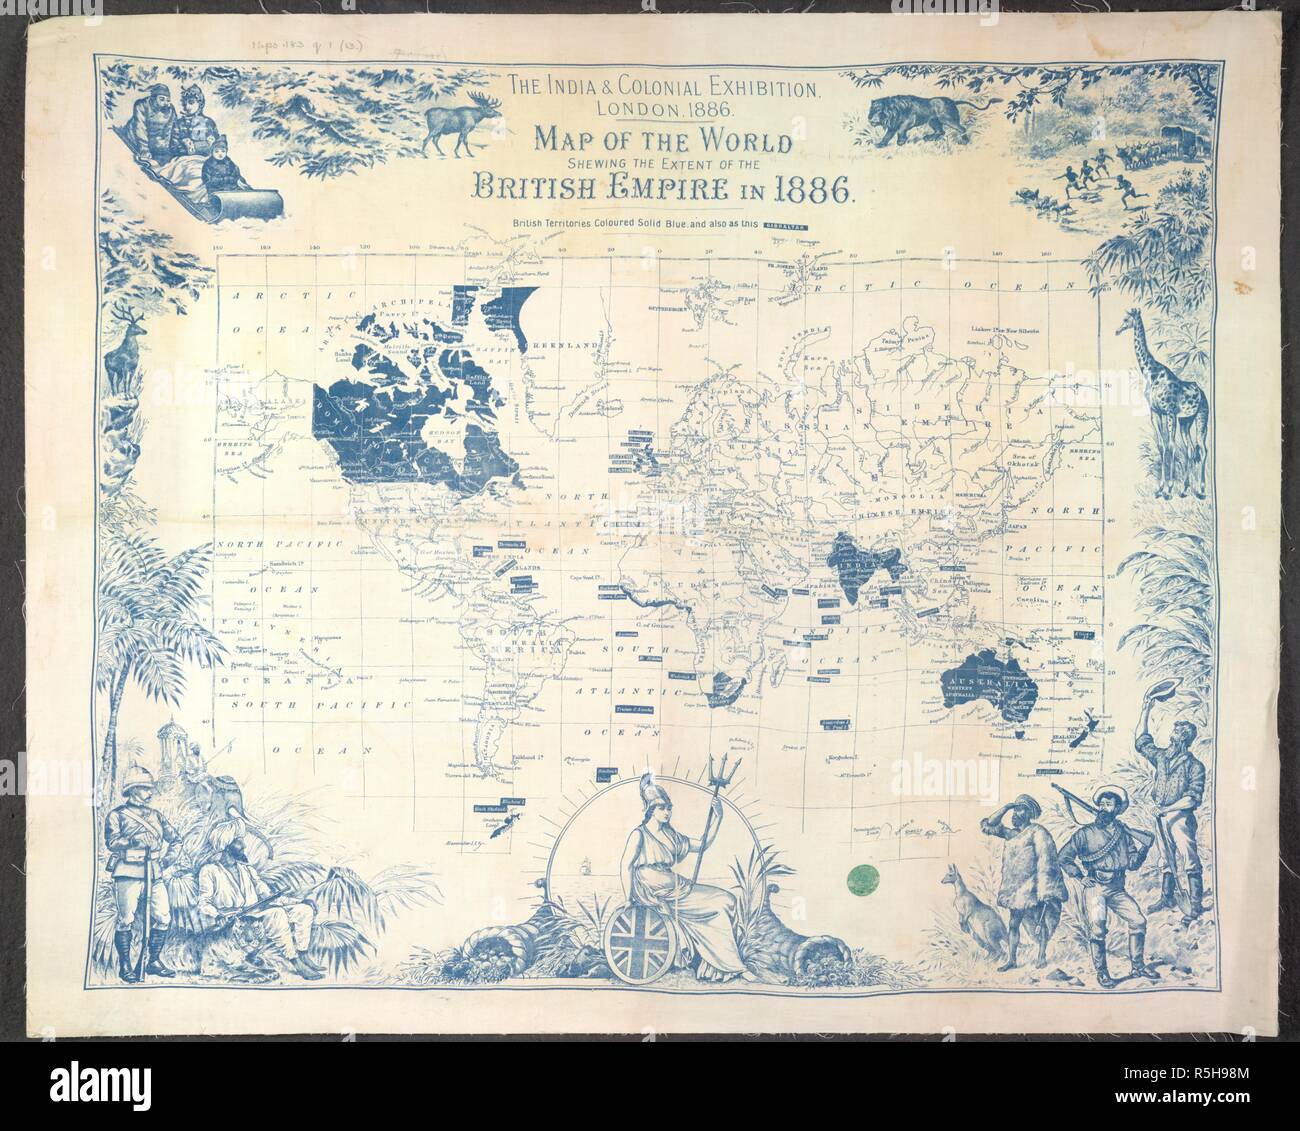 British Empire map. The India & Colonial Exhibition, London, 1886. Map. [London], [1886]. Source: Maps.183.q.1.(13),. Stock Photo